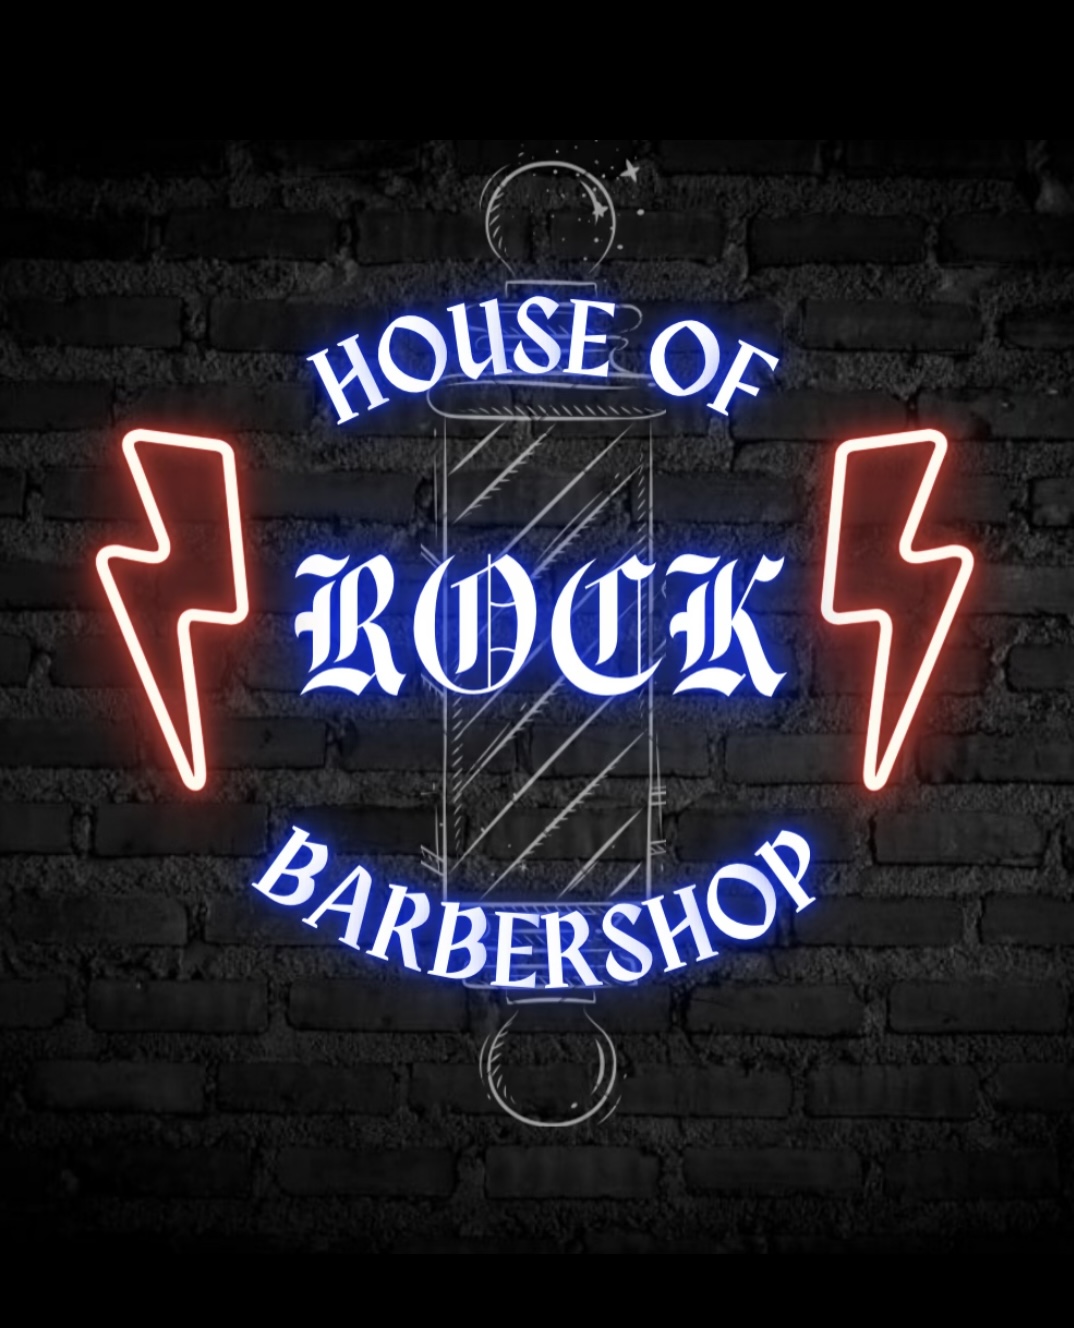 House of Rock BarberShop 1020 Truman St suite a, Kimberly Wisconsin 54136